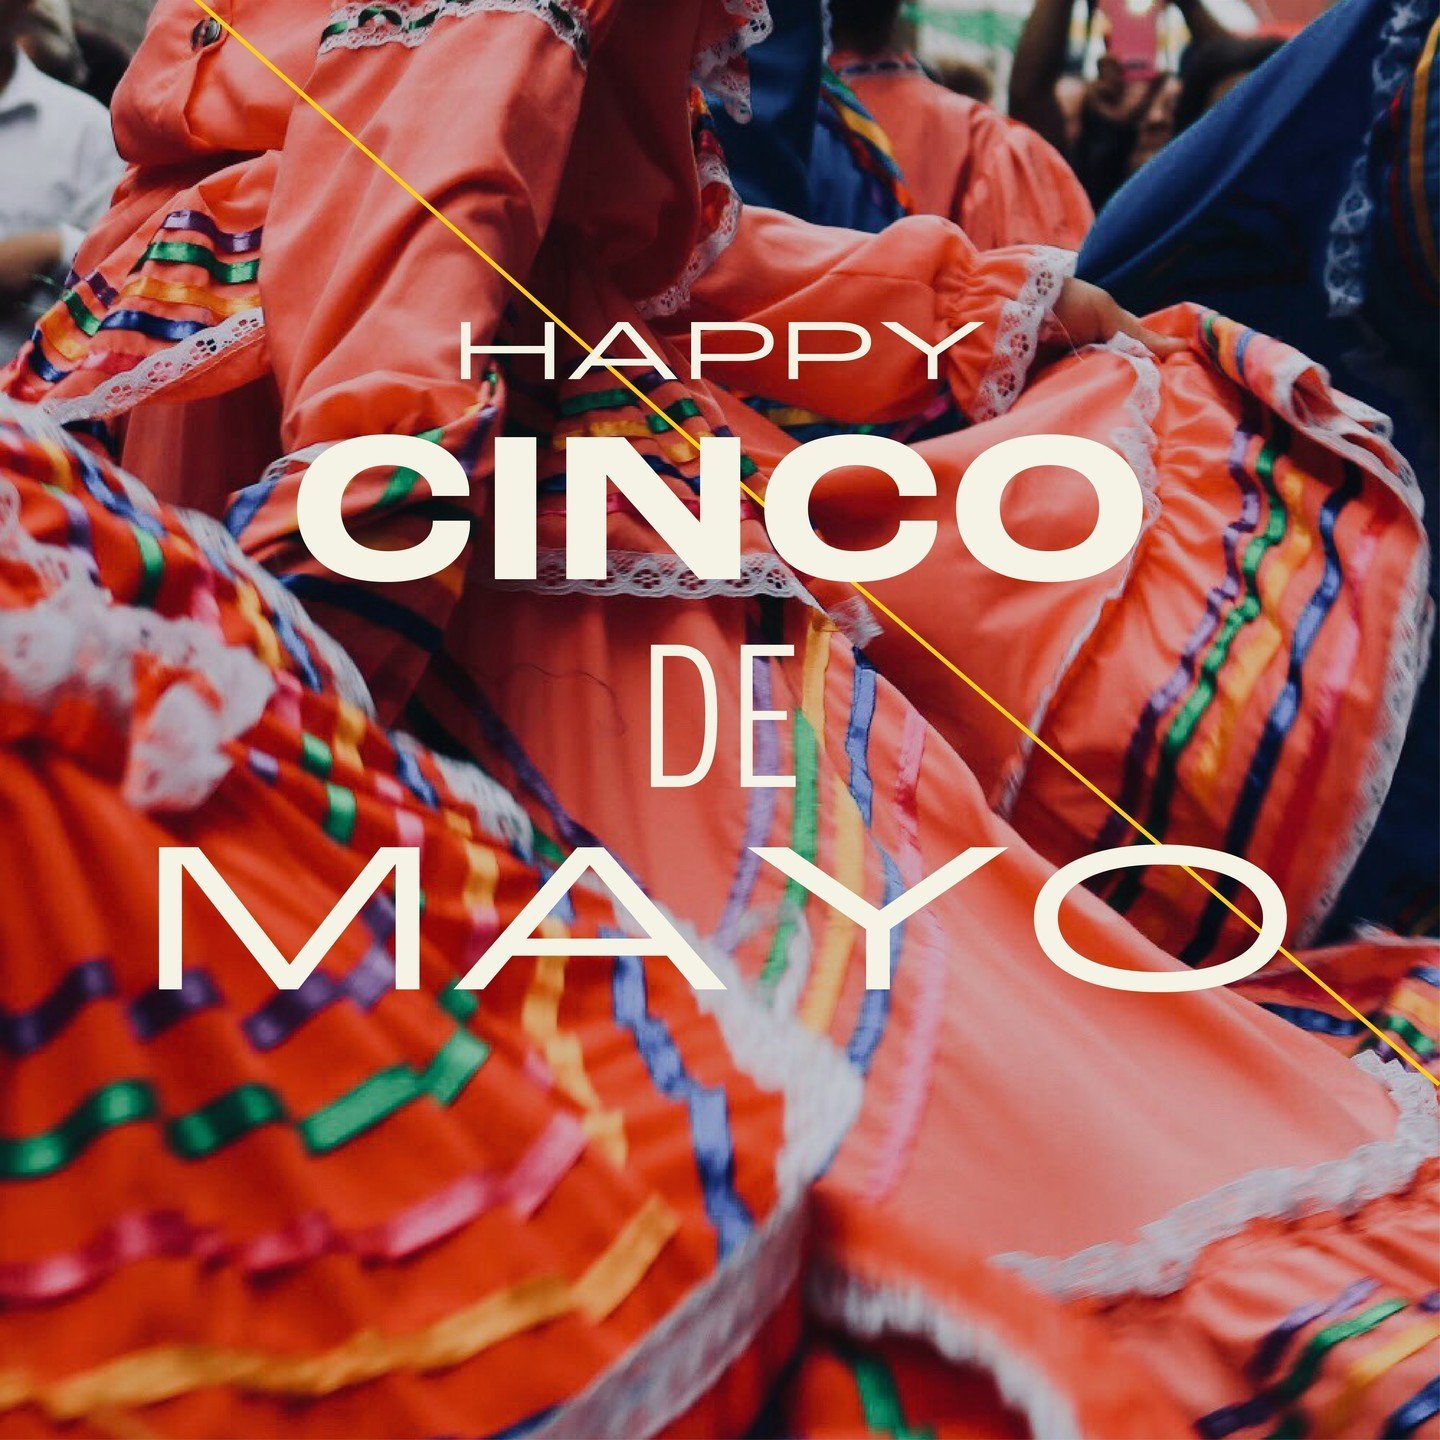 Today let&rsquo;s remember the impact on our Mexican American friends and neighbors have on our community. Diversity truly makes us stronger. &iexcl;Feliz Cinco de Mayo!